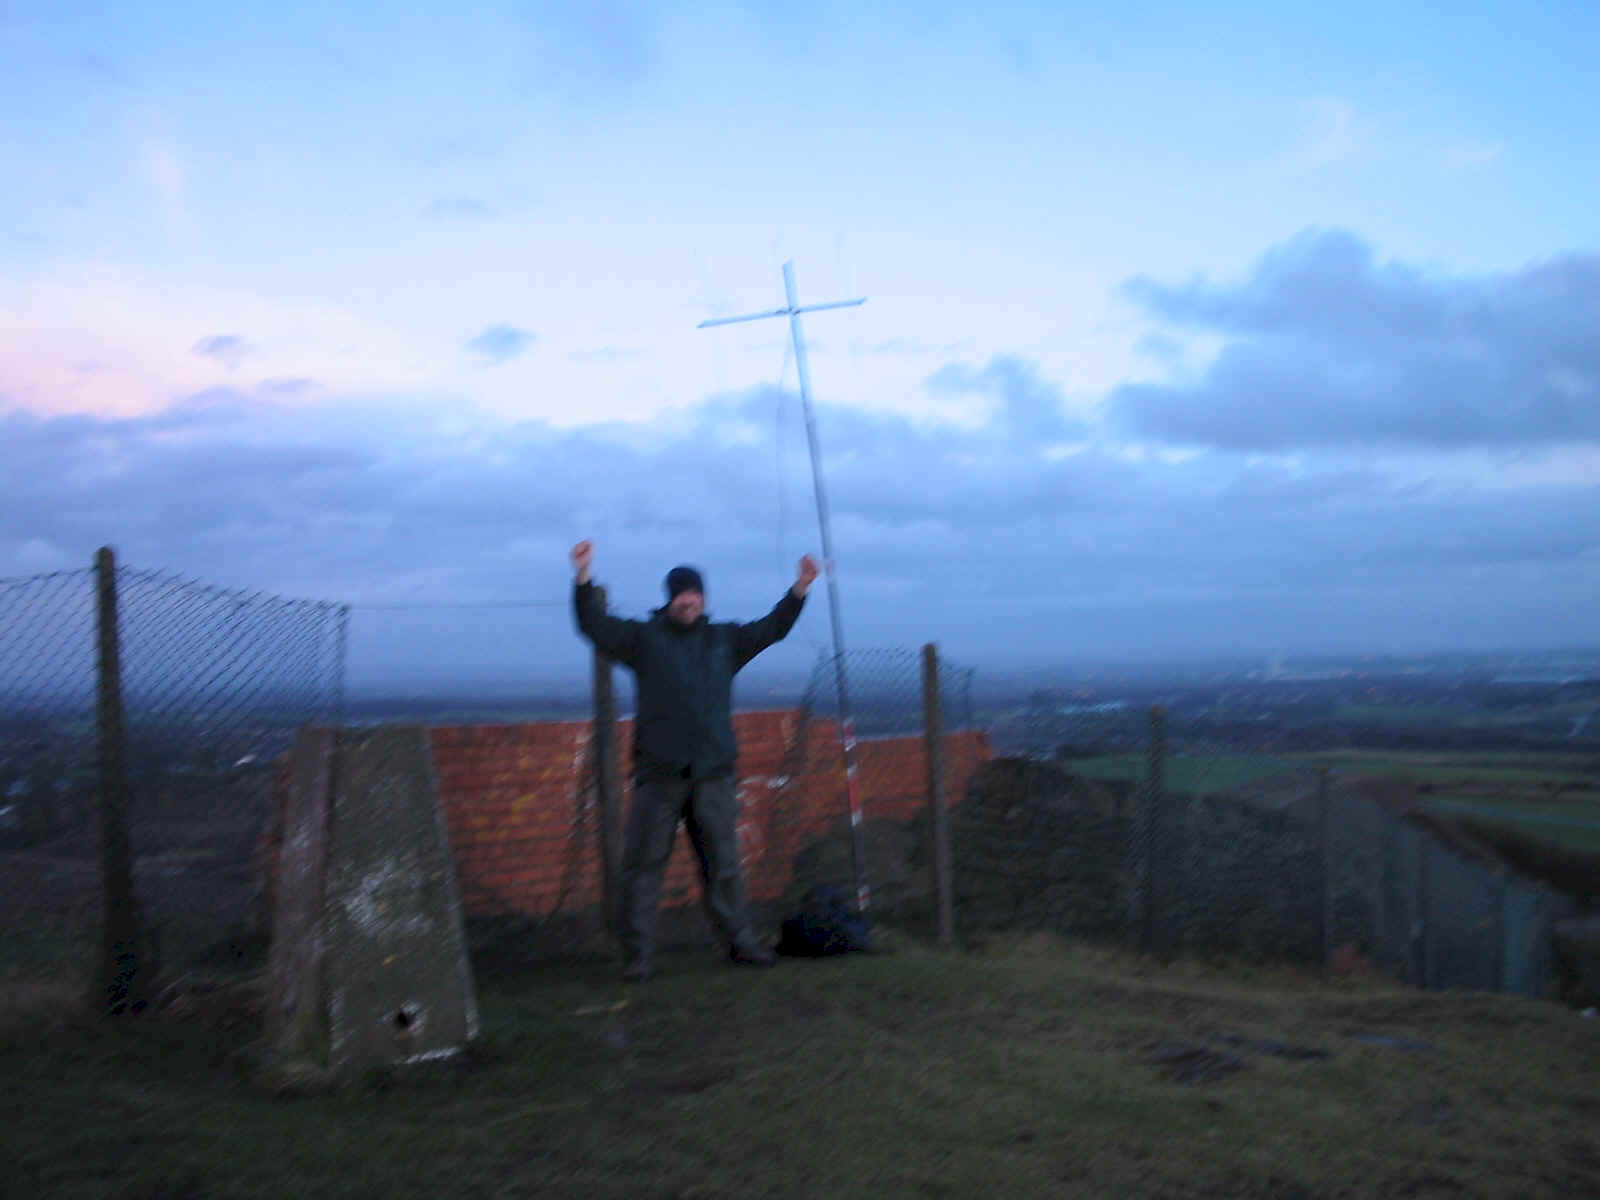 M1EYP celebrates another feat of extreme mountaineering as the evening closes in on Billinge Hill